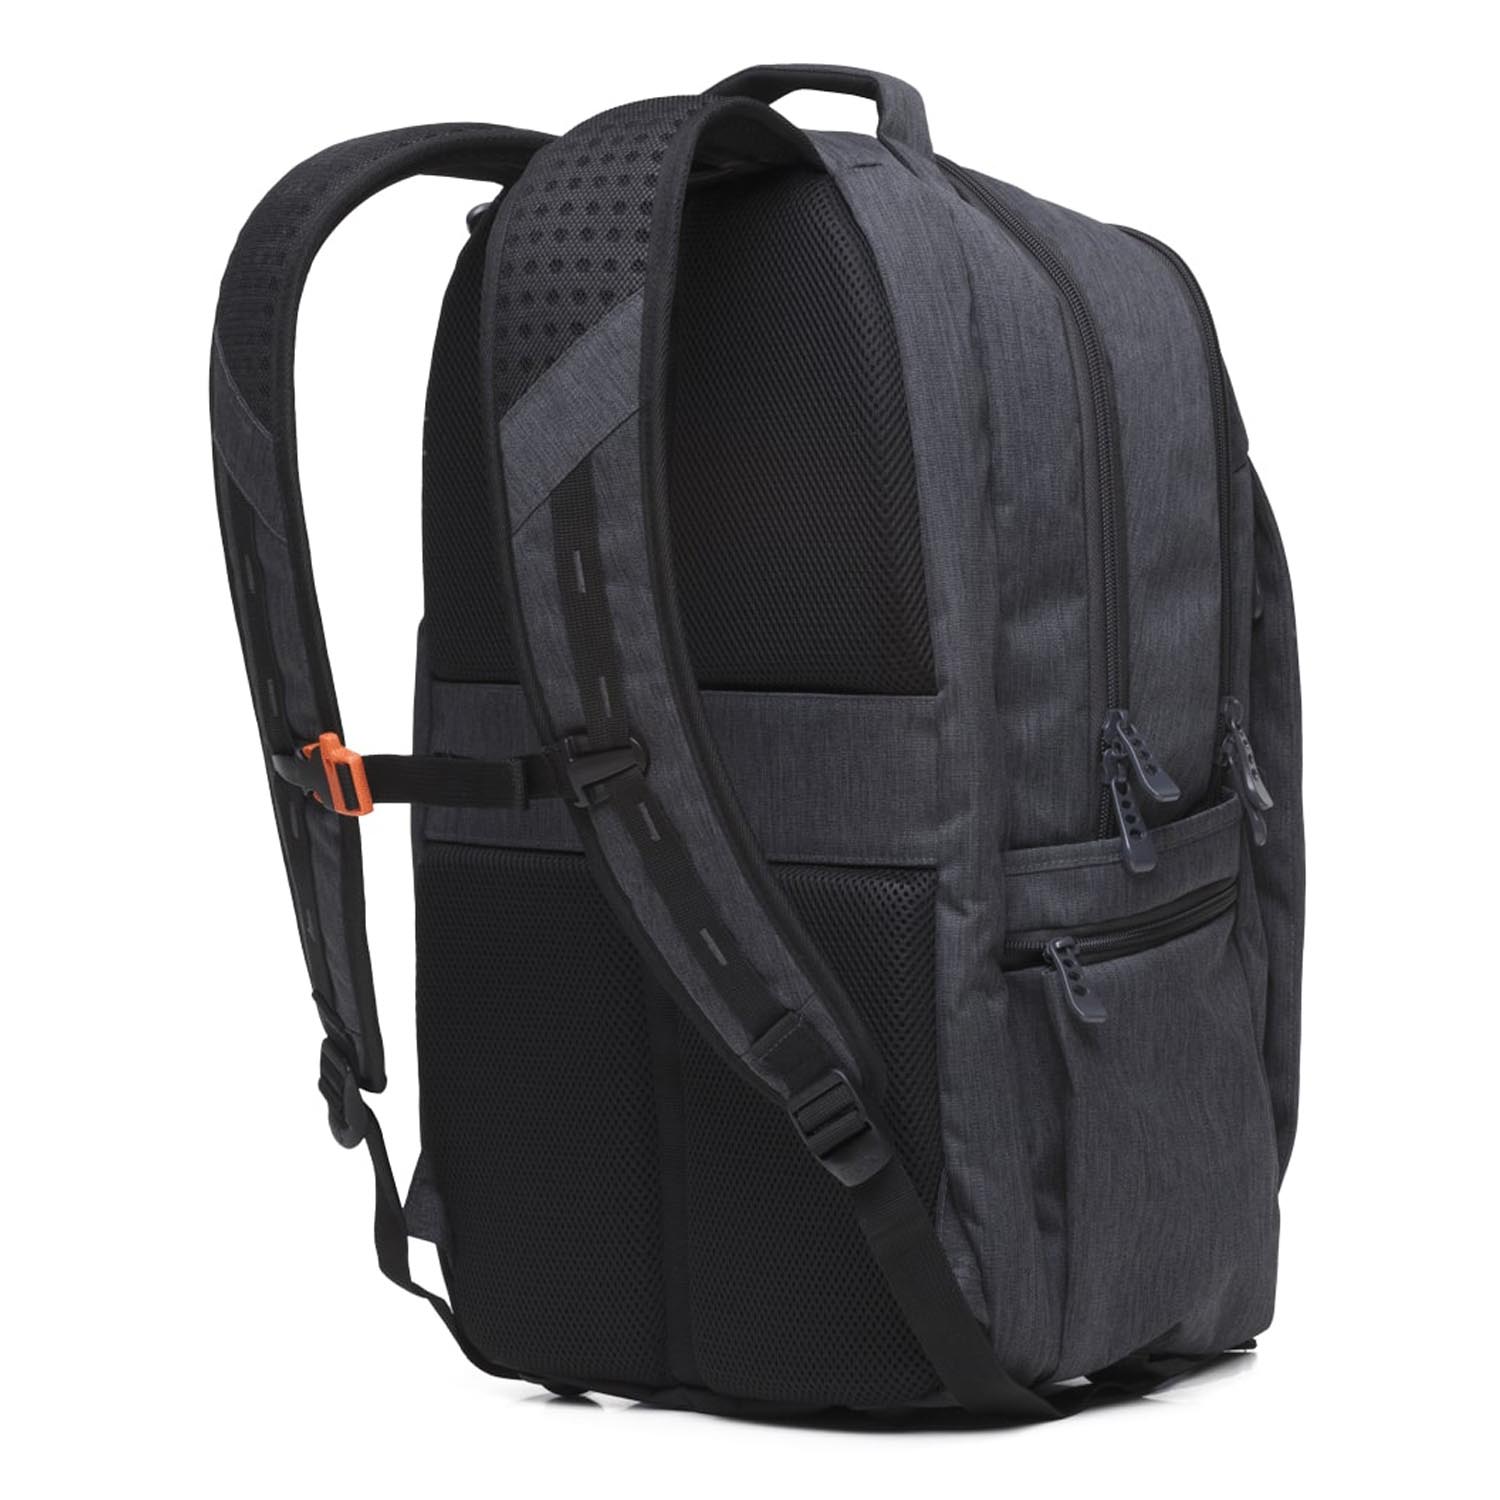 polo stric backpack grey 902021 2200 01